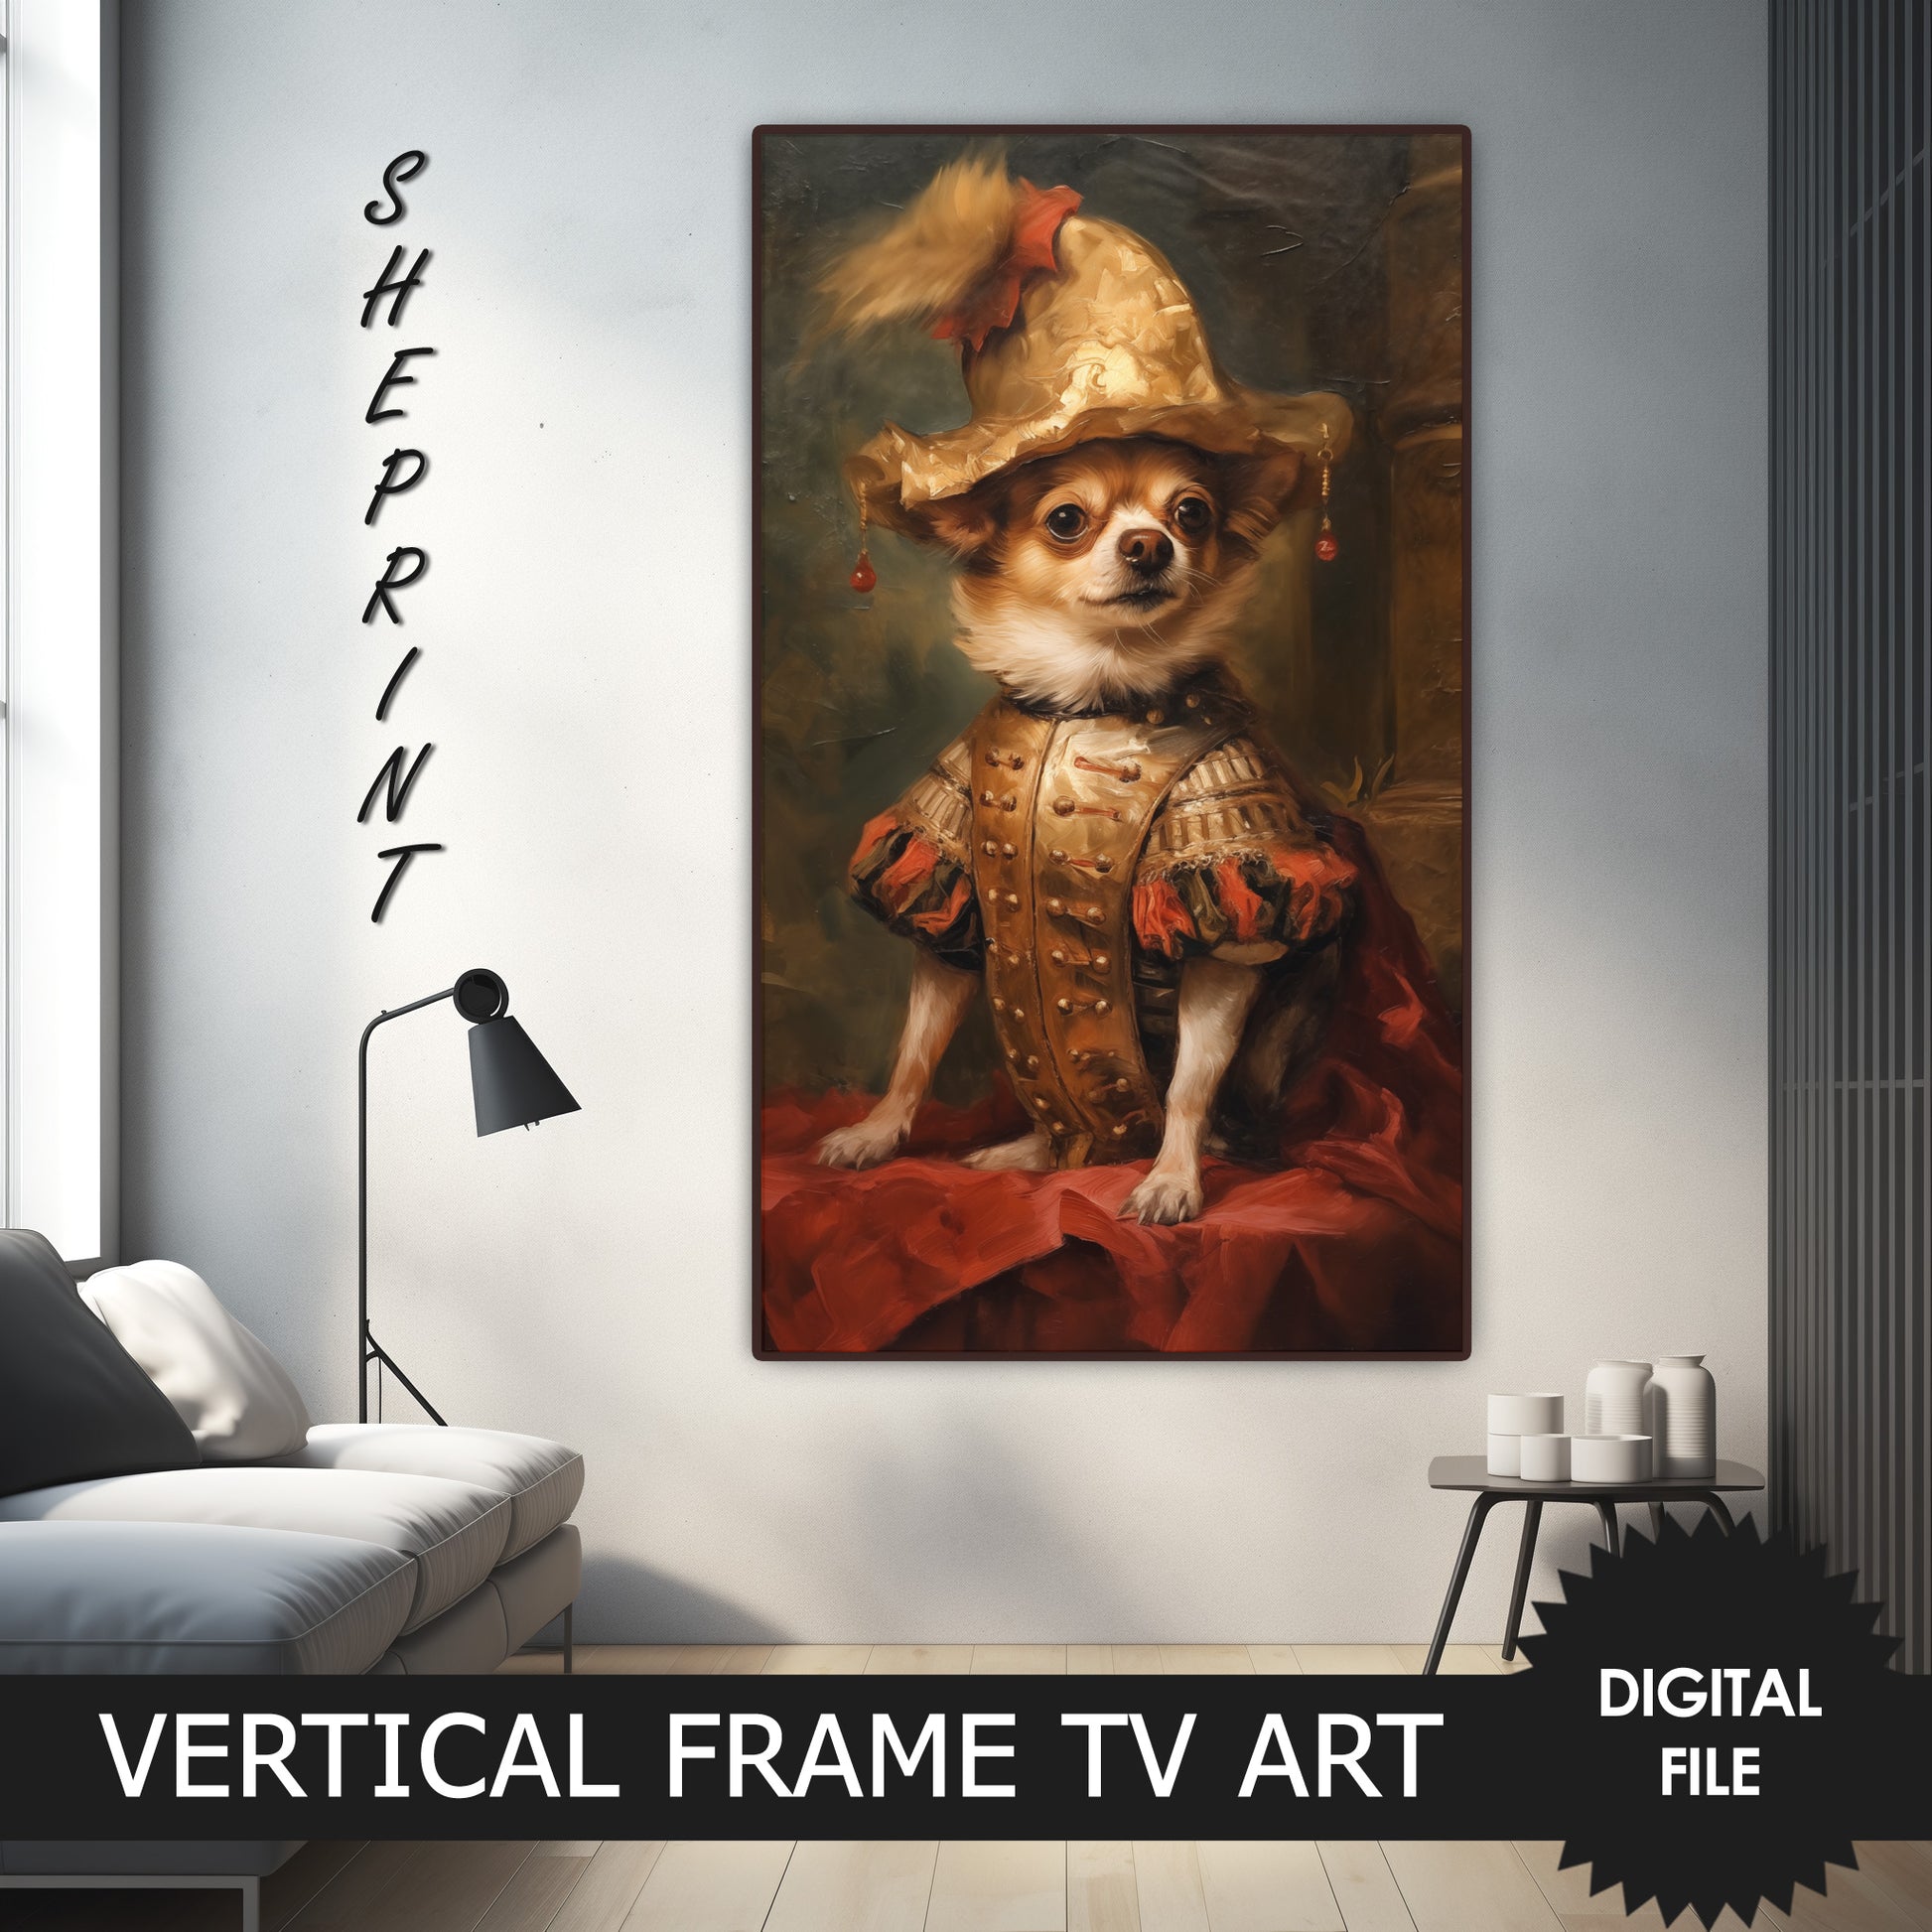 Vertical Frame TV Art | Gold & White Chihuahua Dressed Up Like A King preview on Samsung Frame TV when mounted vertically